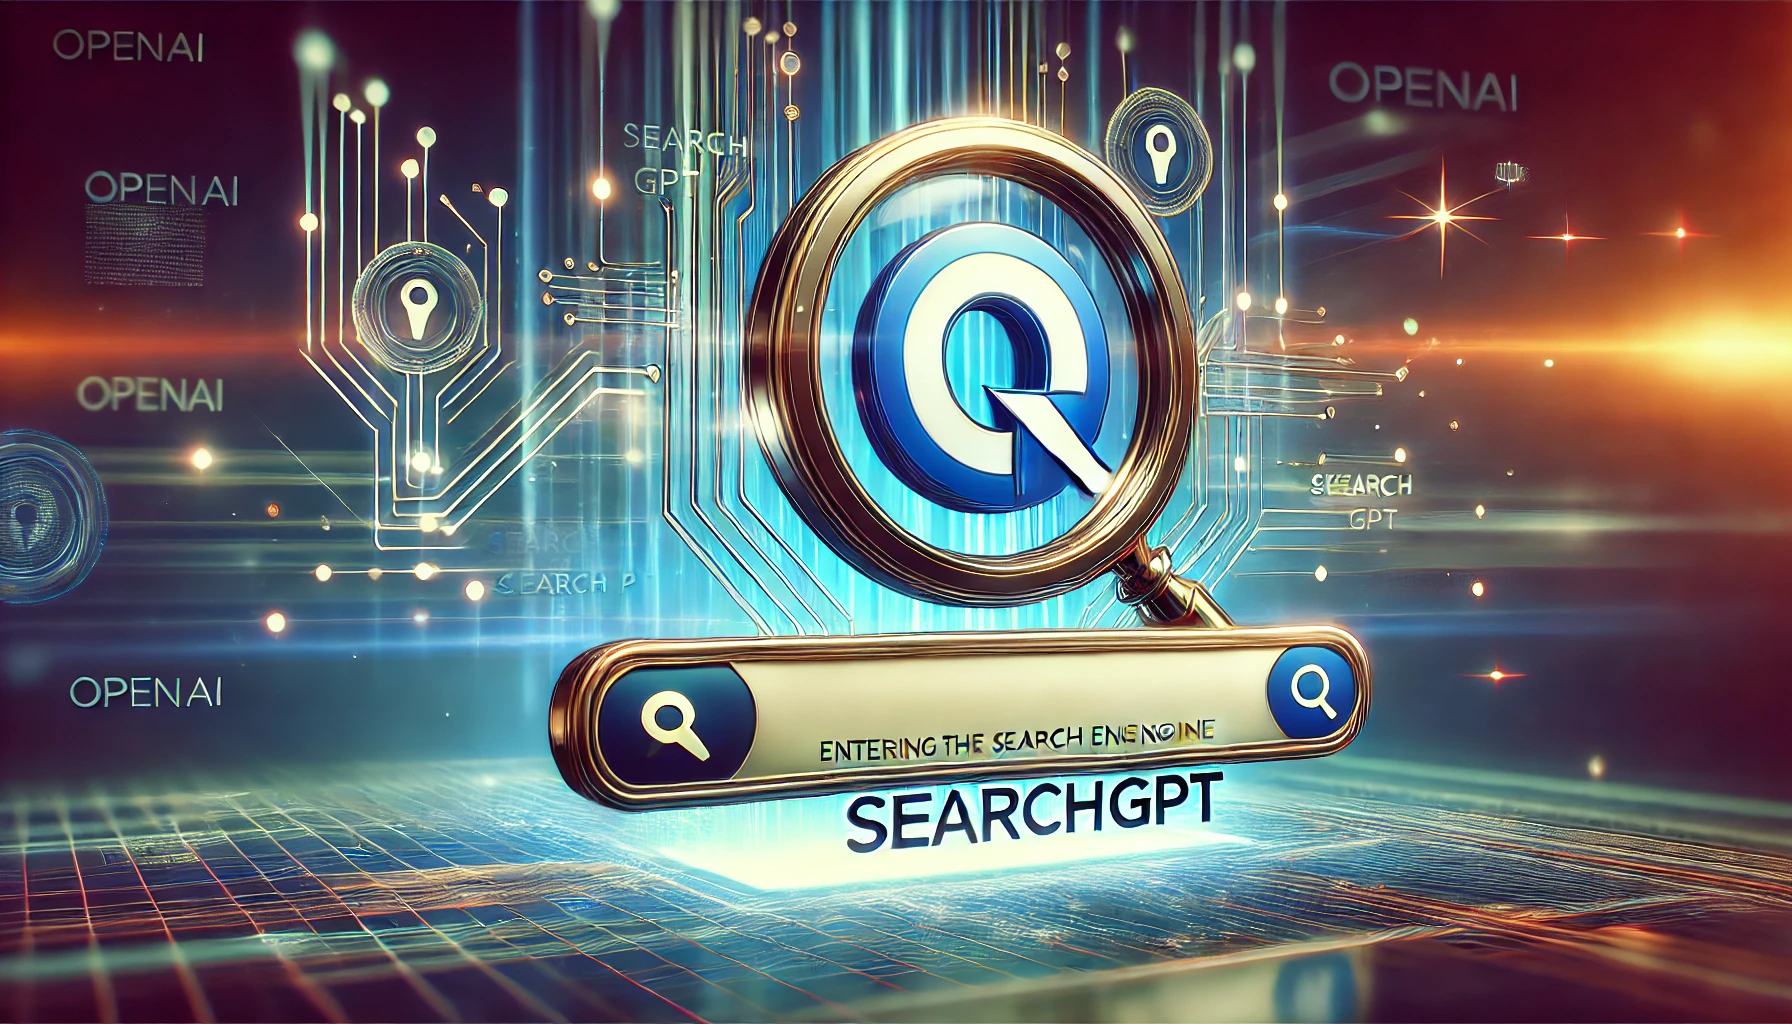 OpenAI Enters the Search Engine Arena with SearchGPT